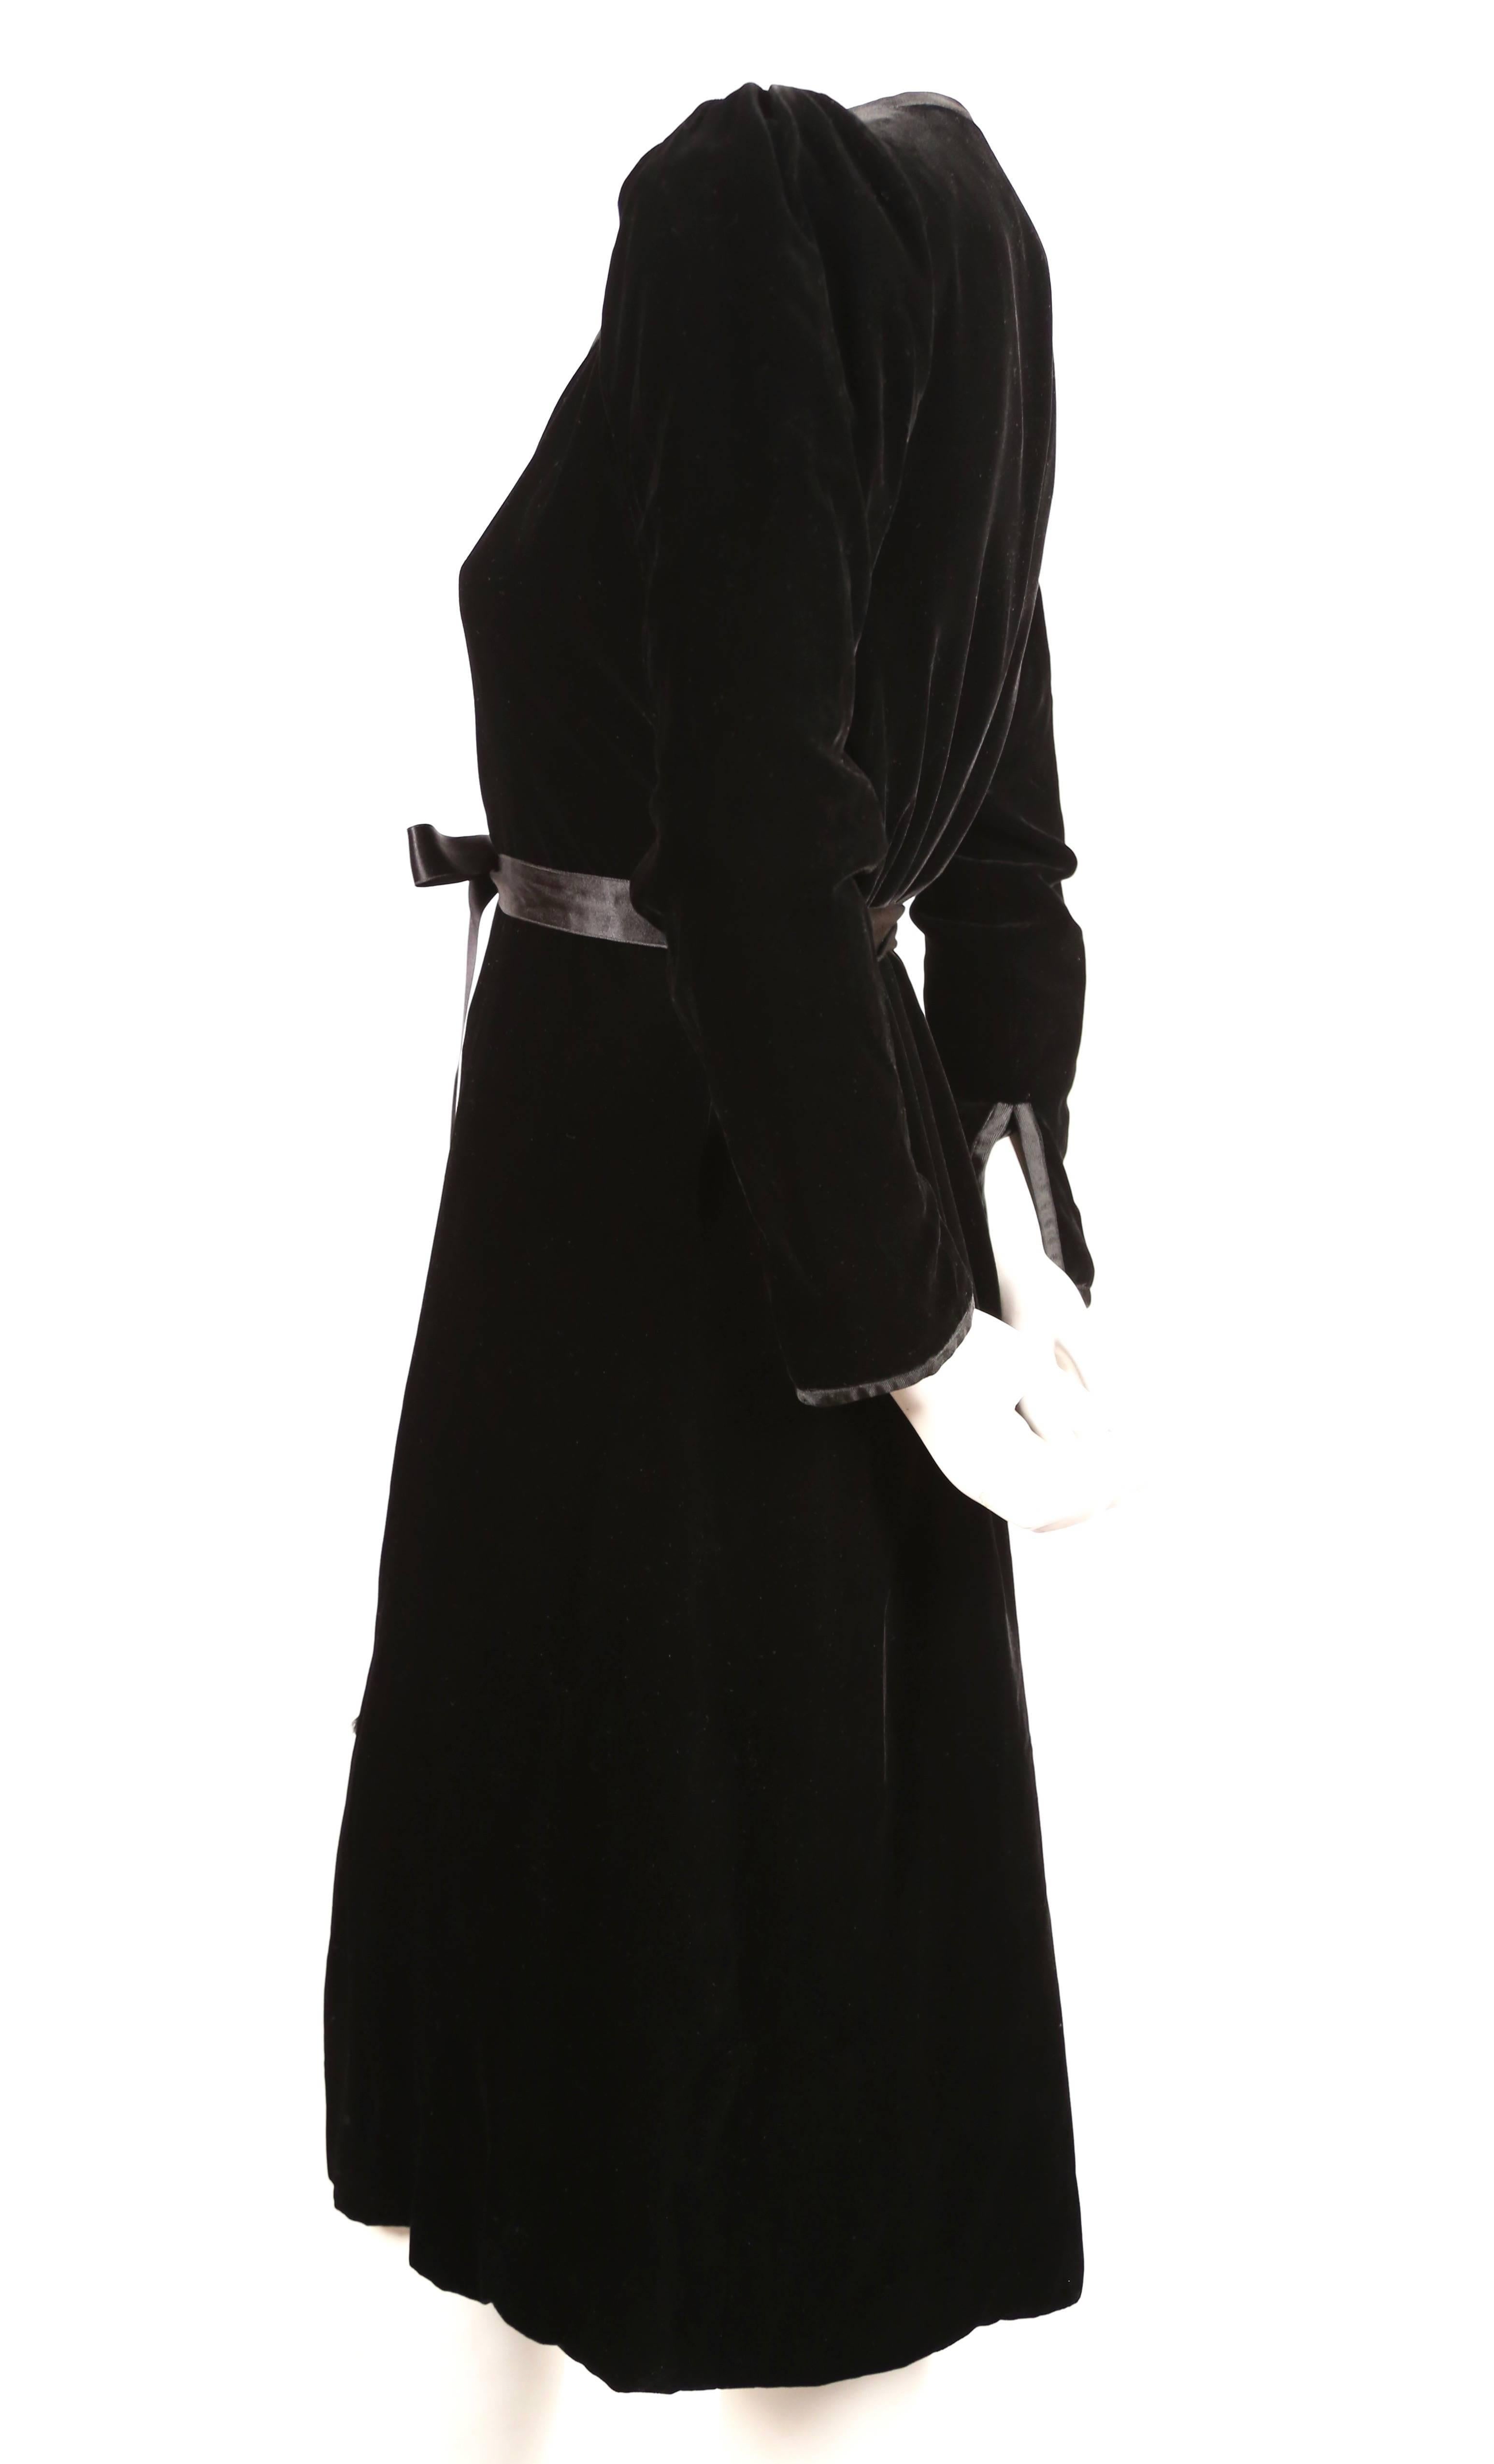 Jet black velvet wrap dress with satin ribbon trim designed by Yves Saint Laurent dating to the 1970's. Labeled a French size 36. Approximate measurements: shoulders 14